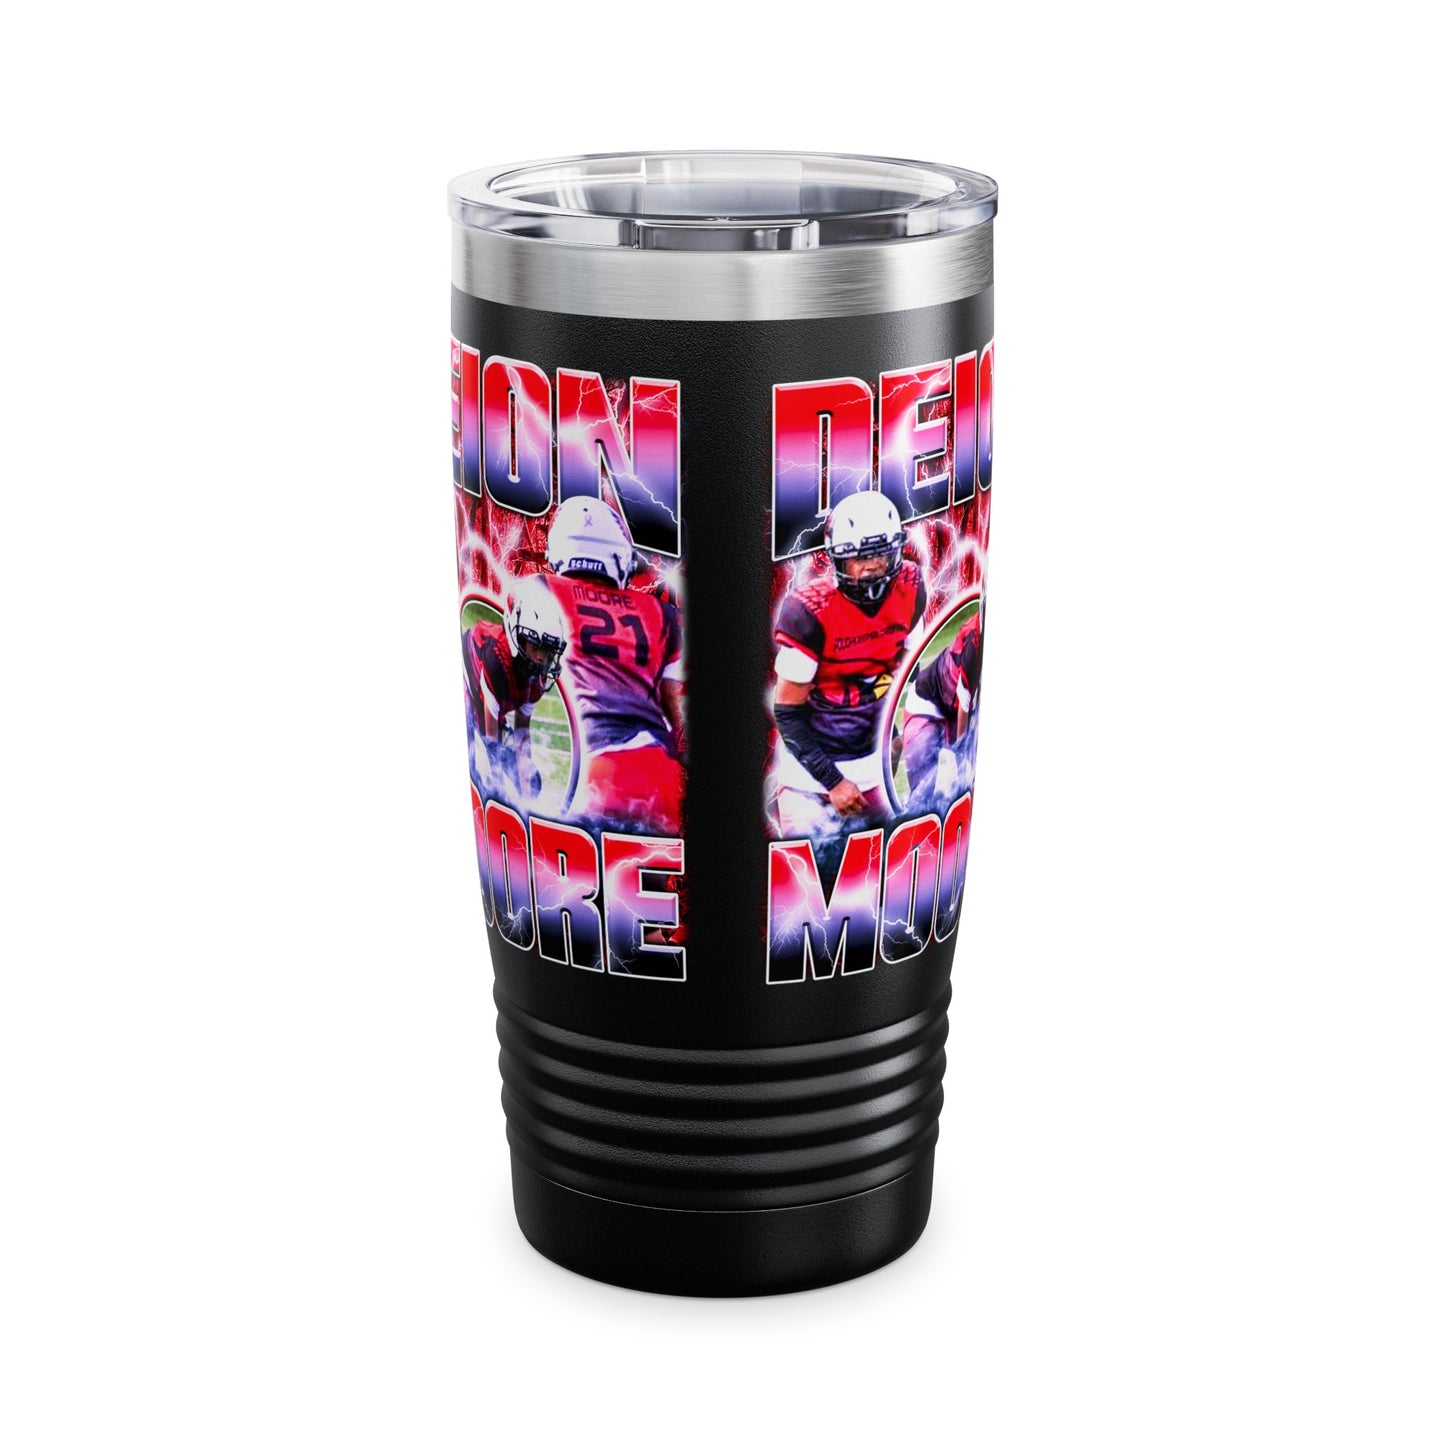 Deion Moore Stainless Steal Tumbler